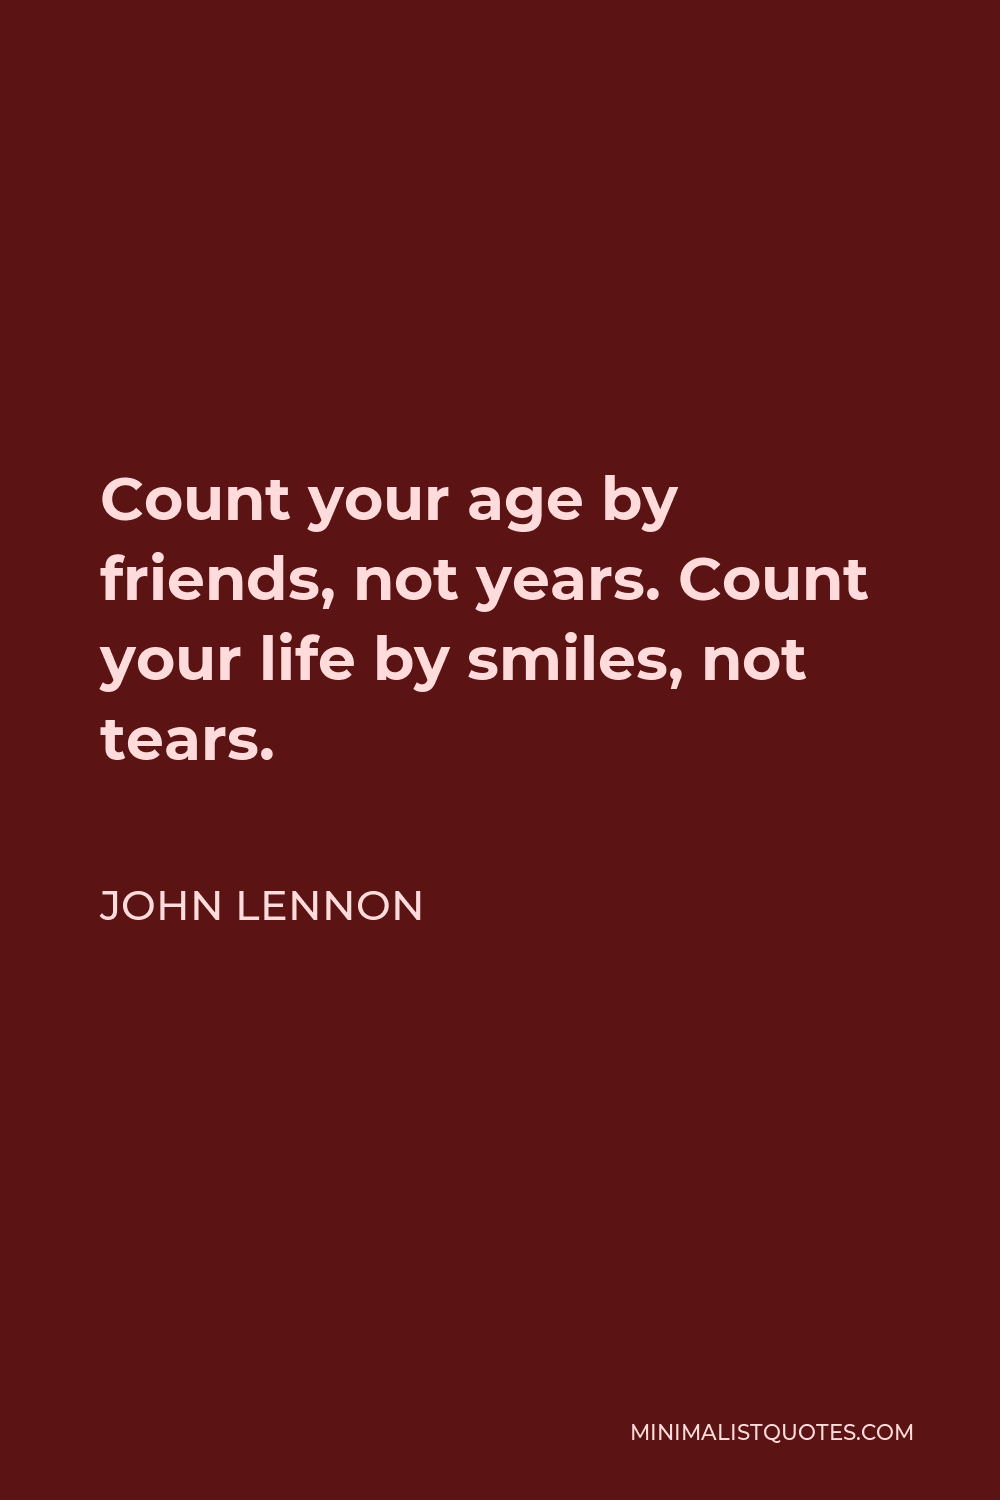 John Lennon Quote: Count your age by friends, not years. Count your ...